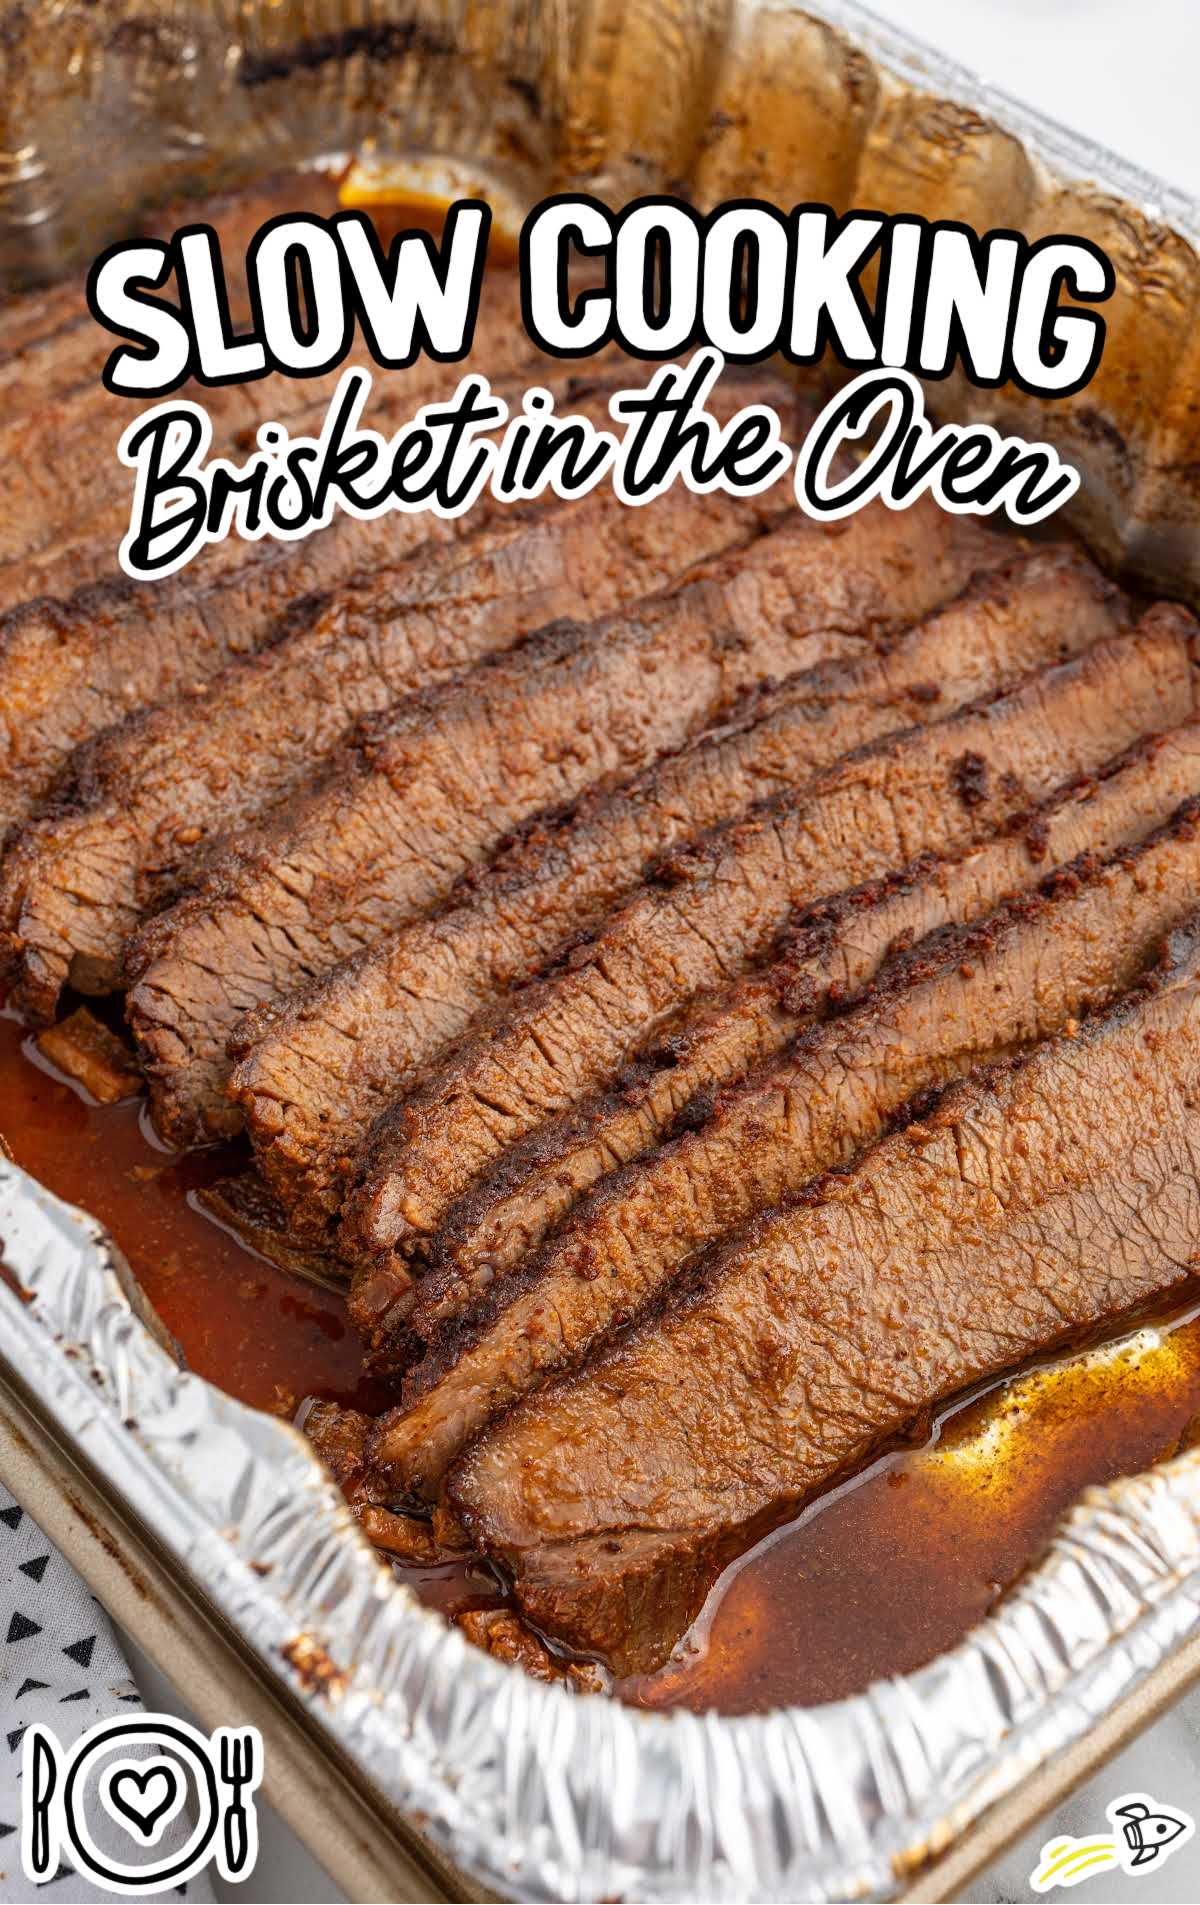 a cooked brisket in a aluminum foil pan